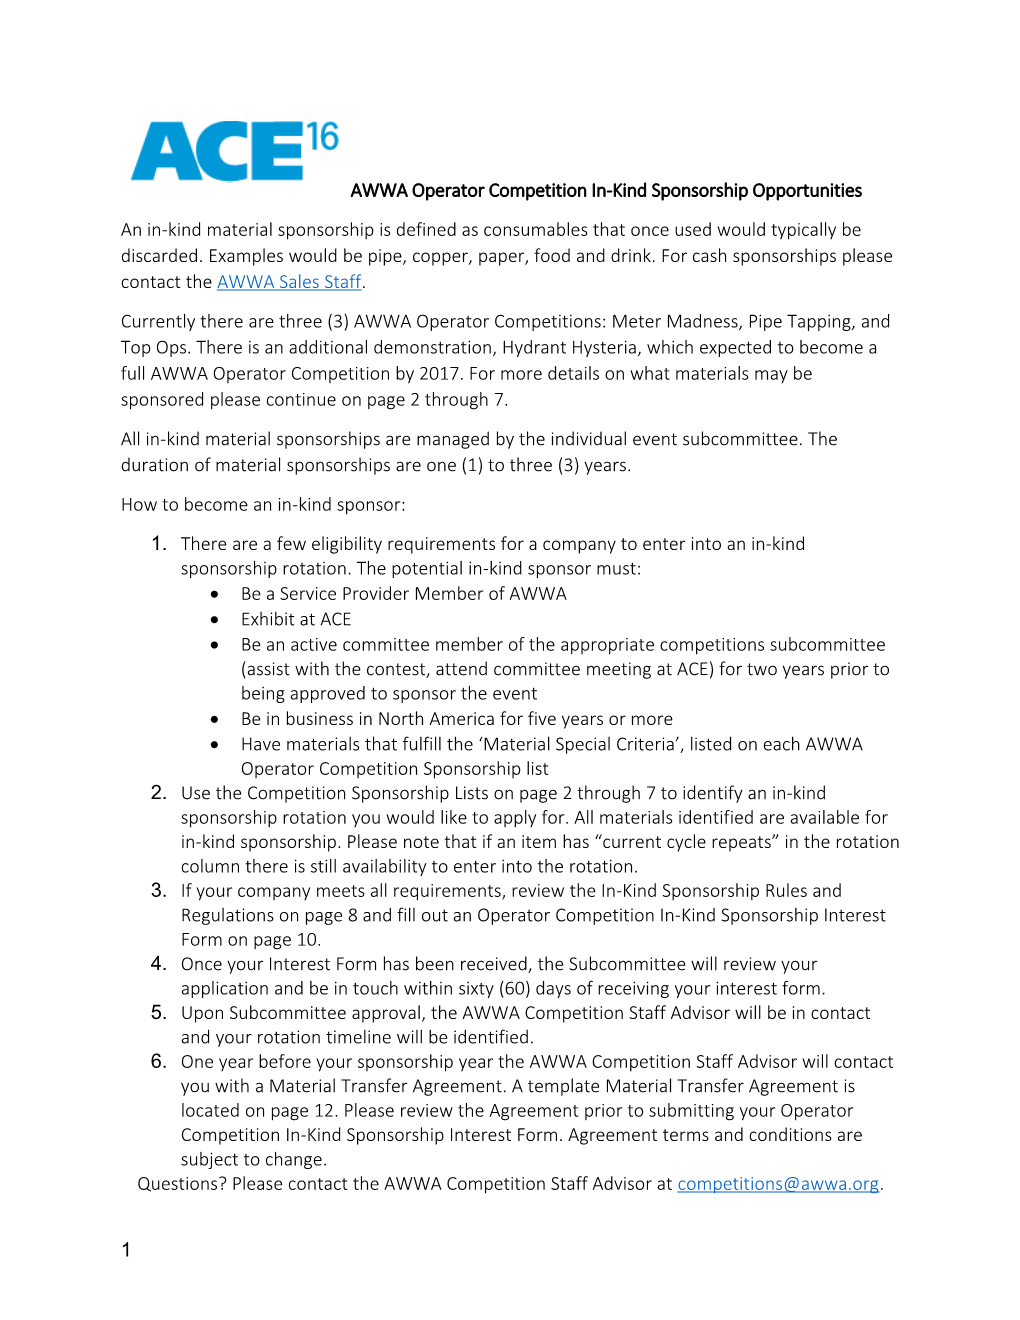 AWWA Operator Competition In-Kind Sponsorship Opportunities